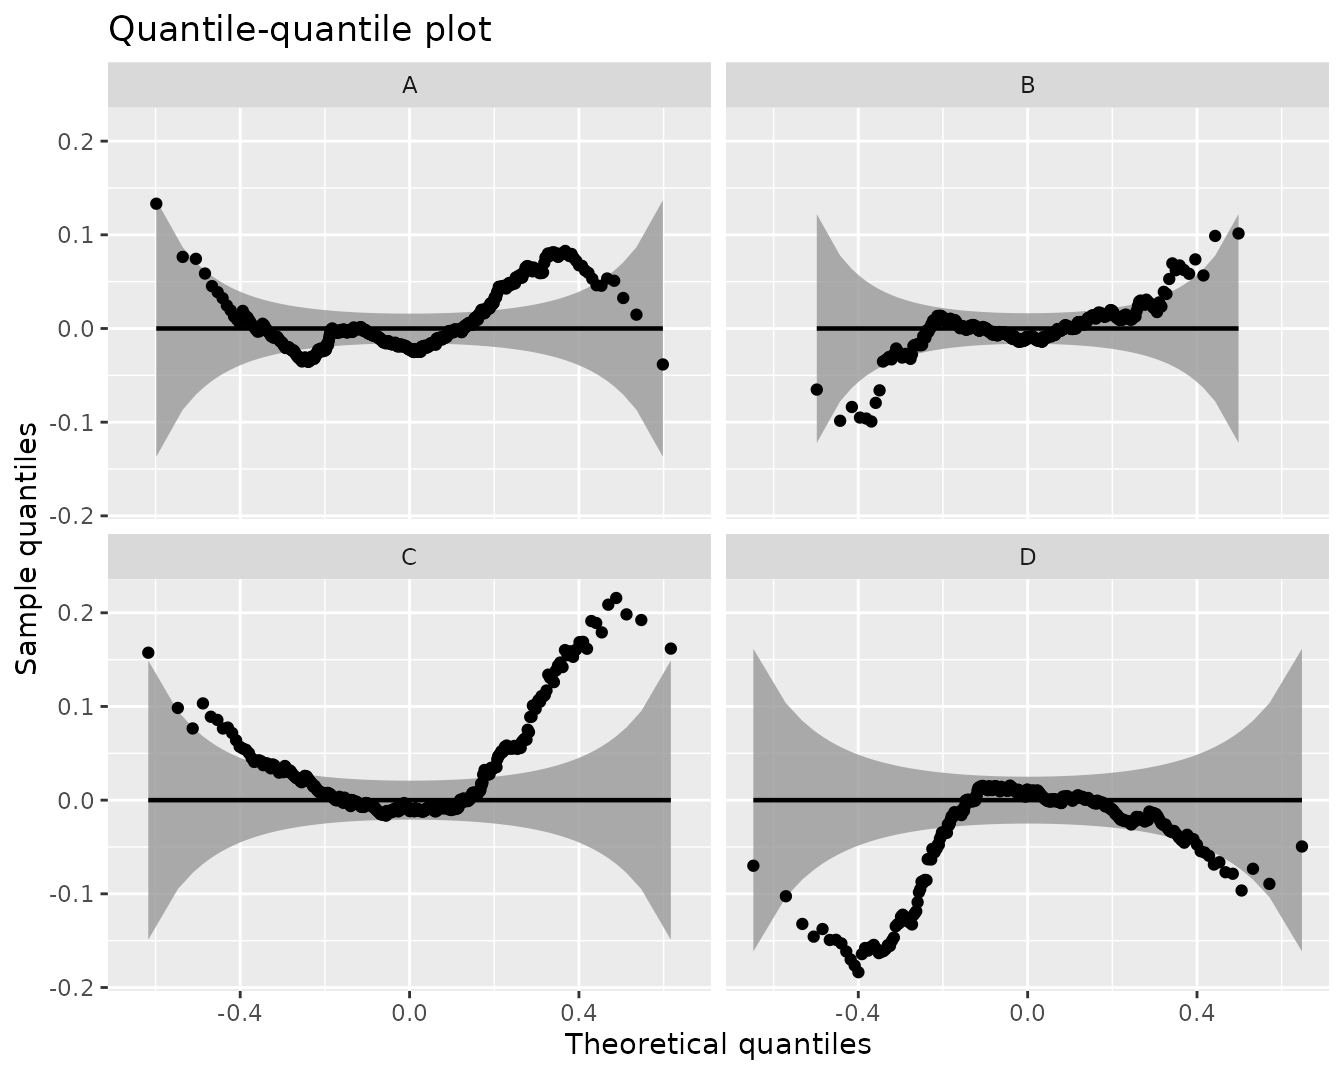 Cluster-specific detrended QQ-plot for the selected KML model.